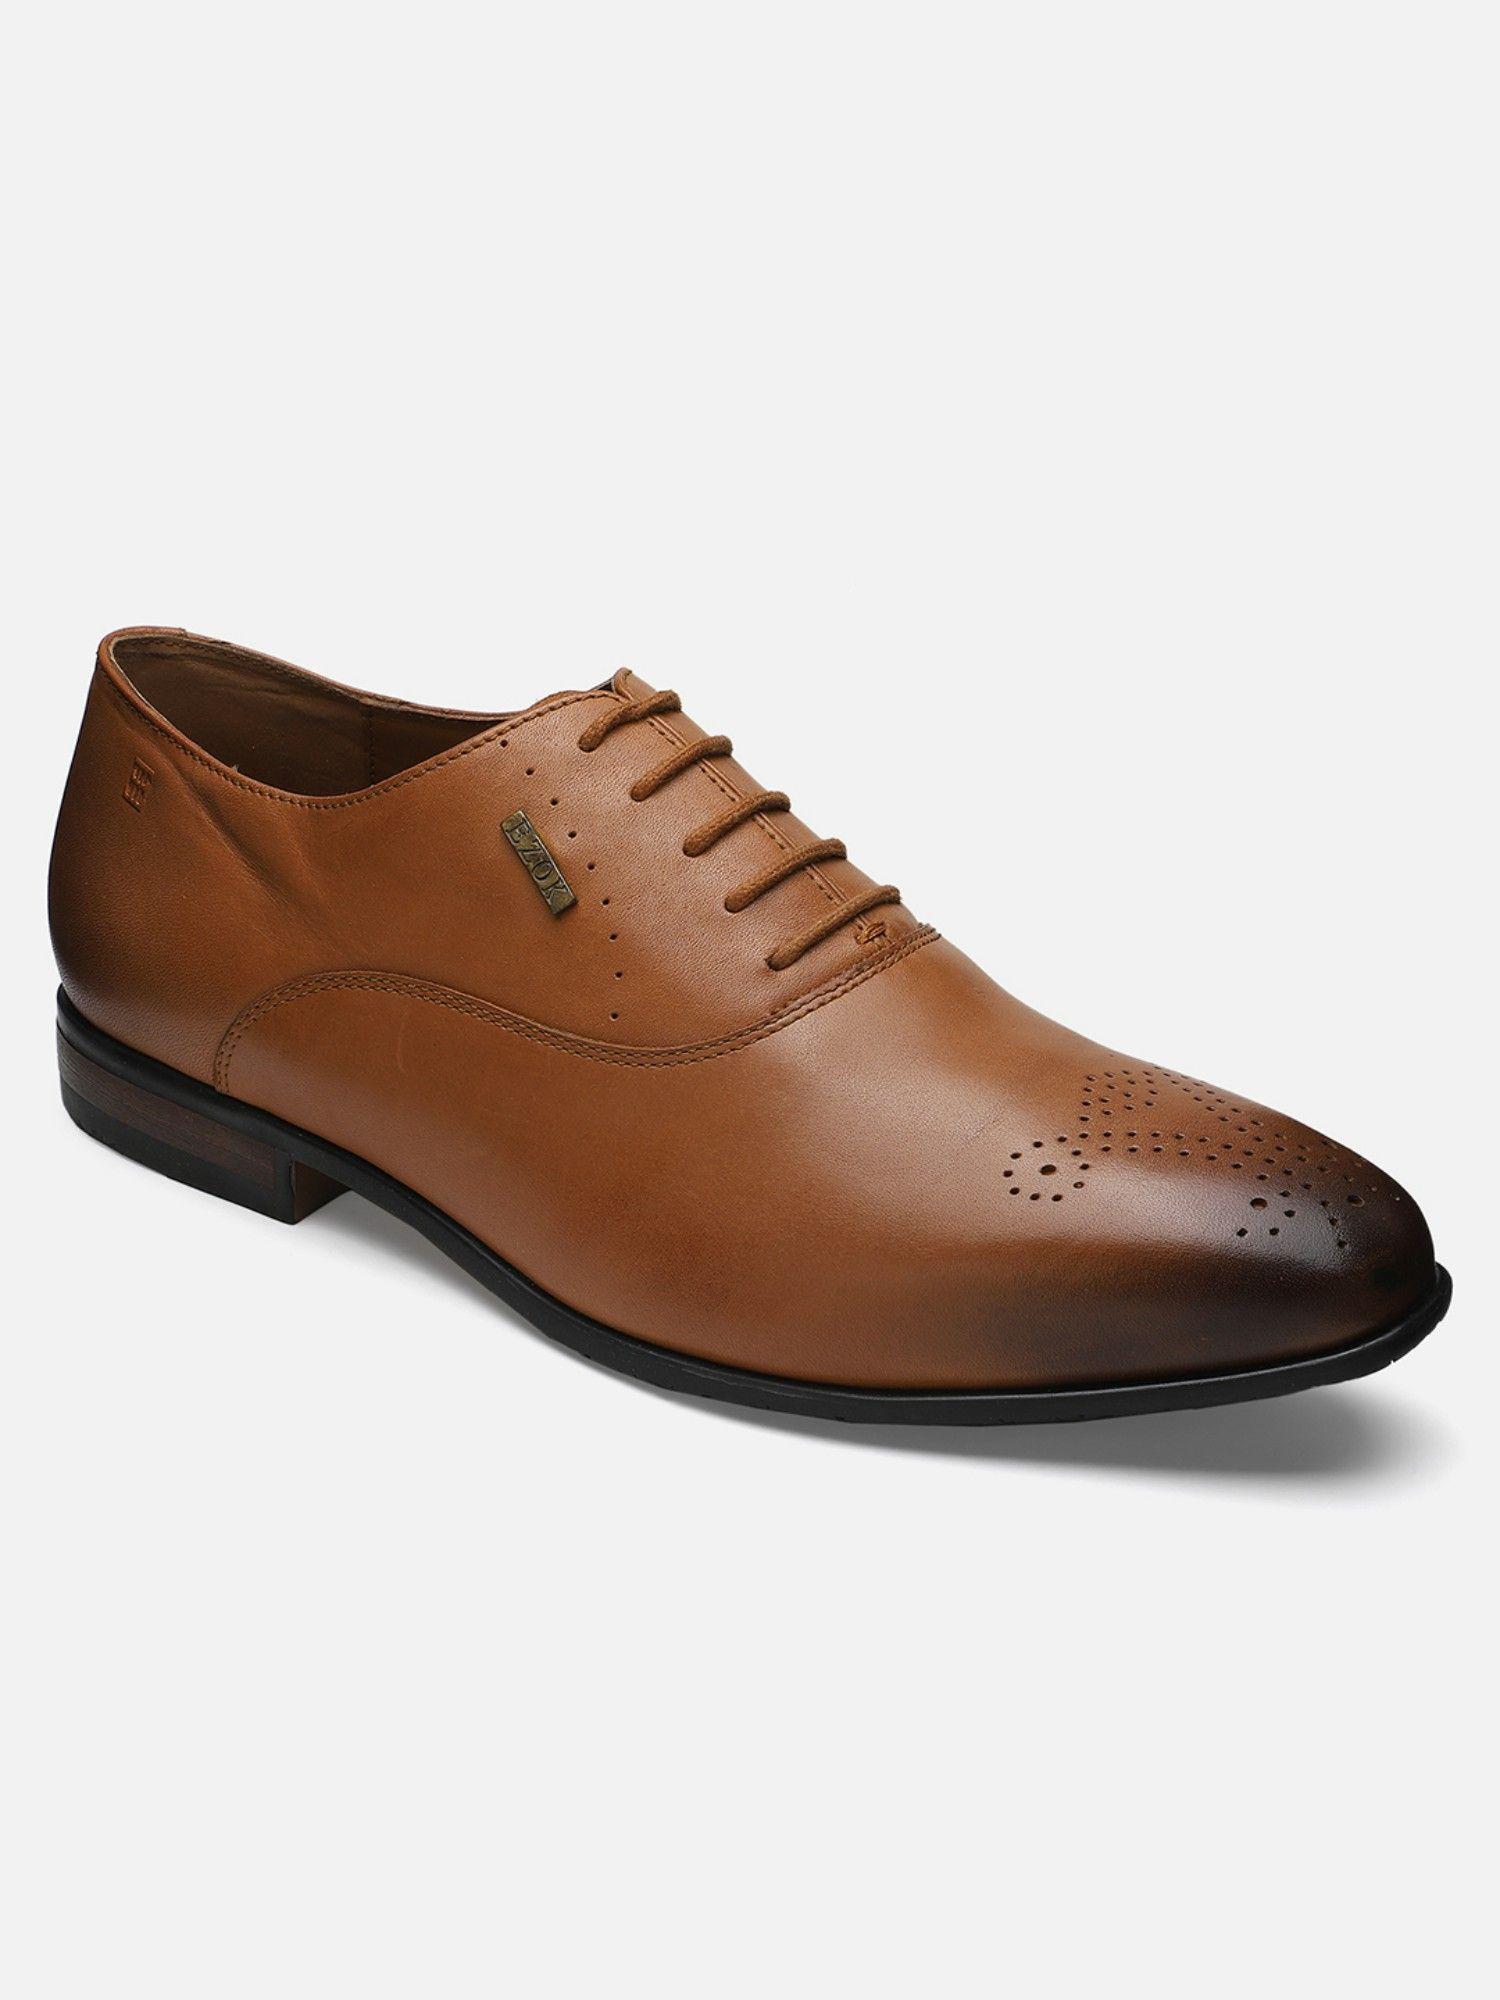 leather formal solid tan brogues for men